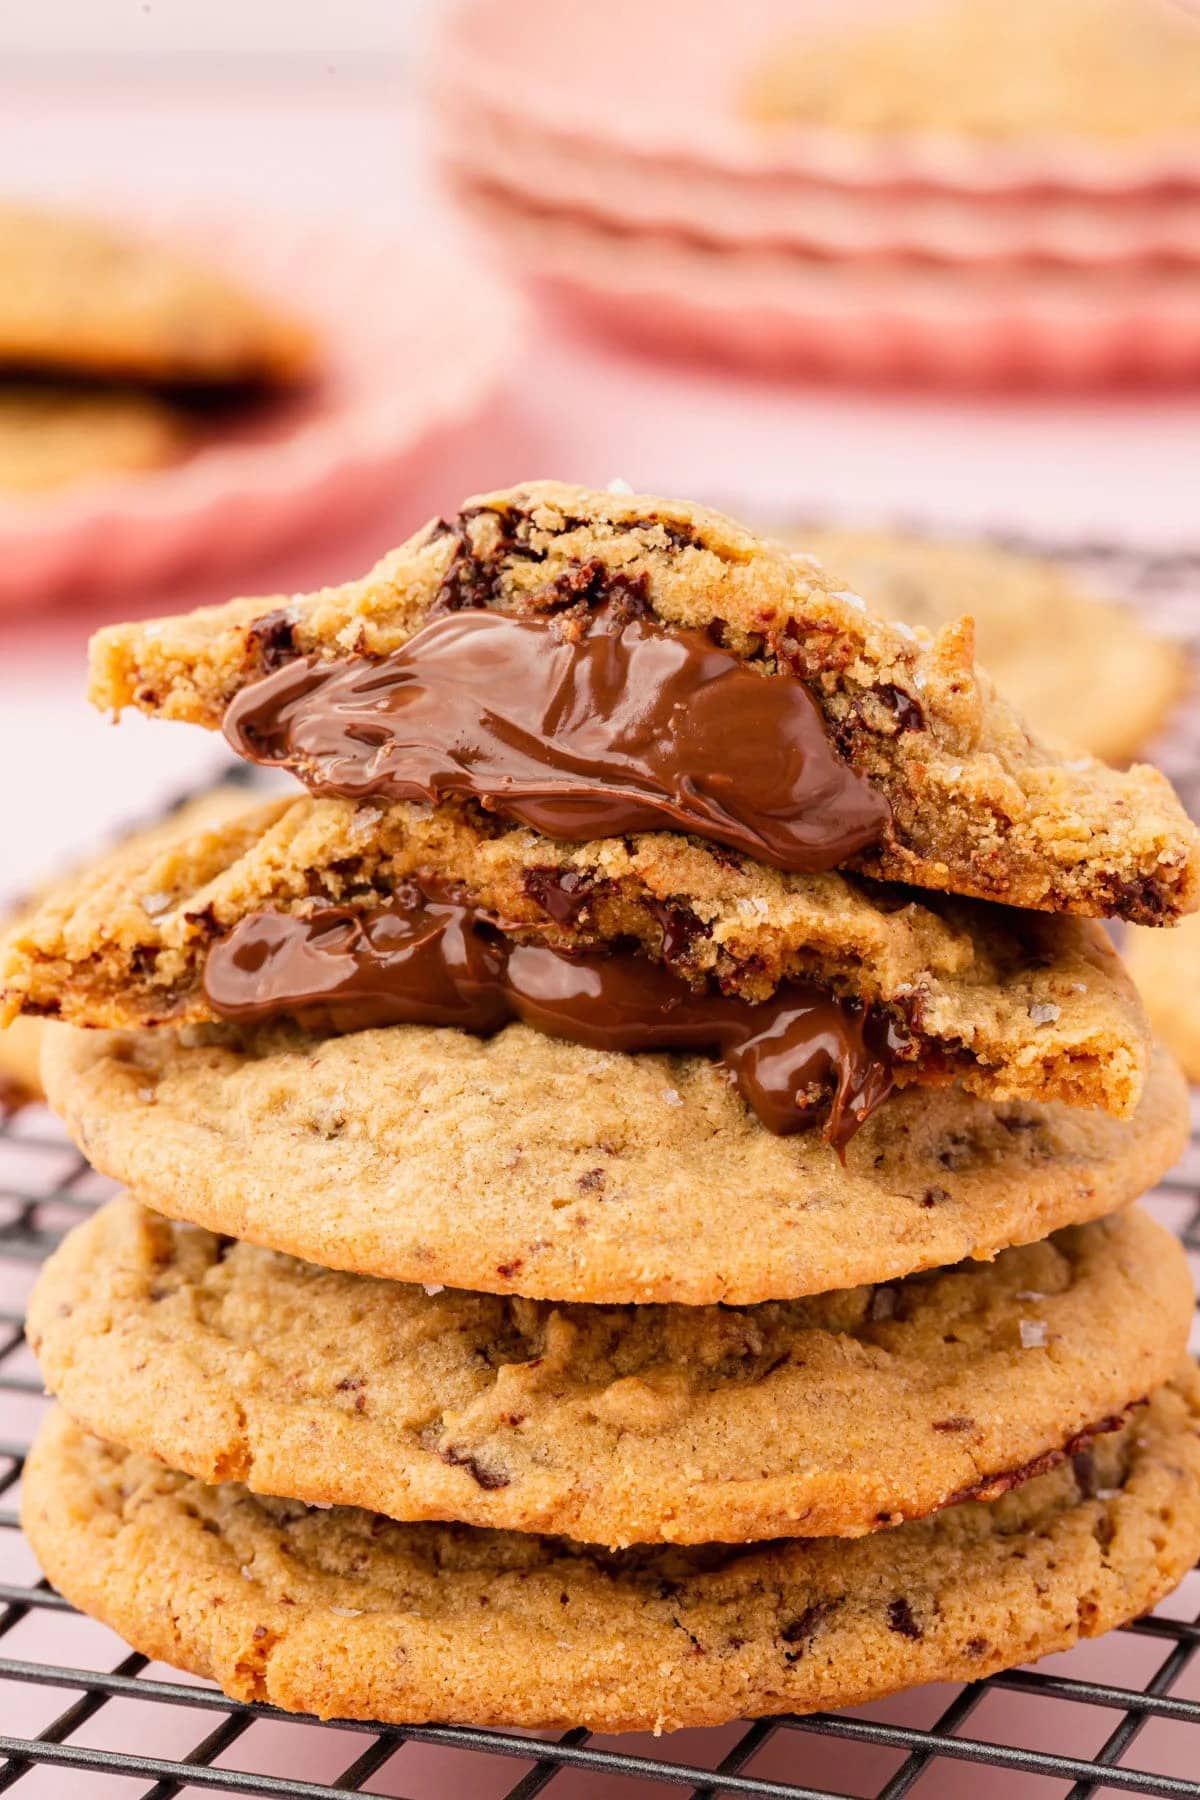 13 Cookie Recipes That Will Change the Way You Bake Forever!